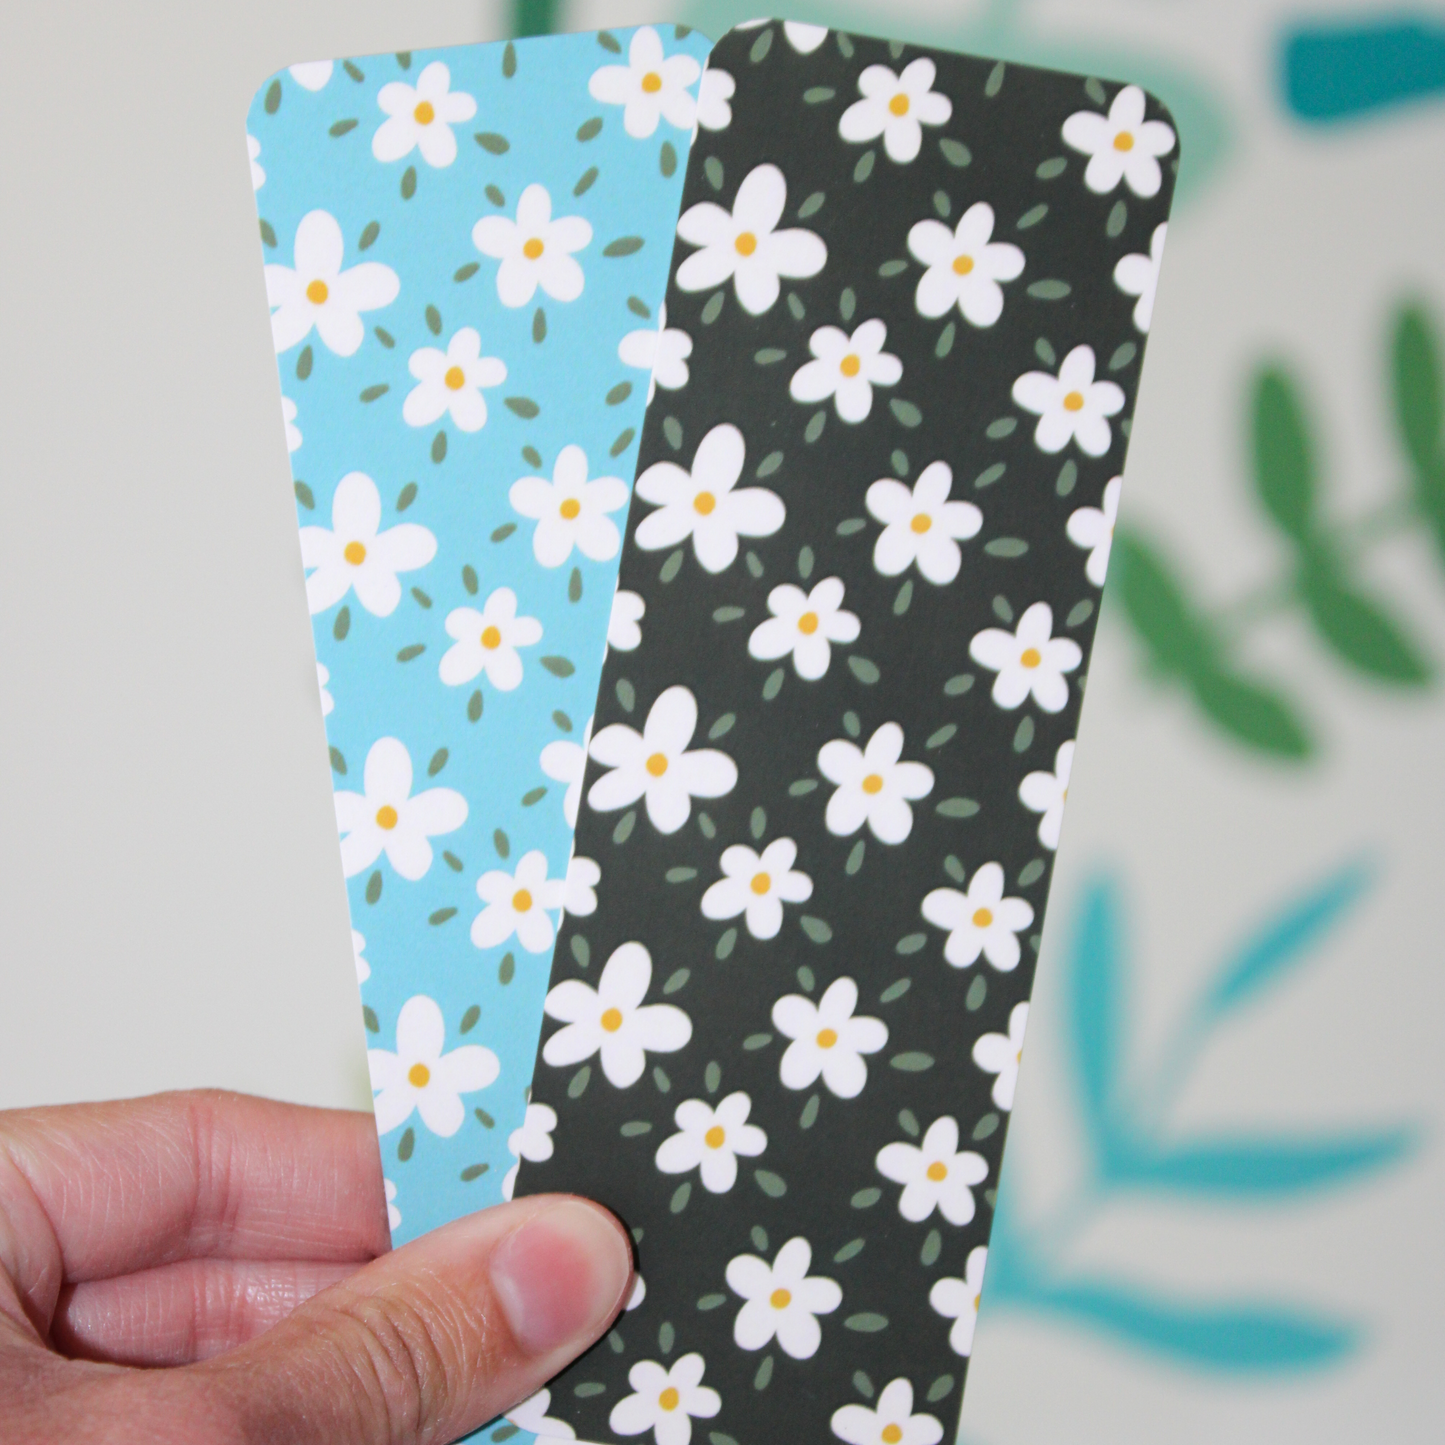 A hand holding two bookmarks, one being the blue daisy pattern and one being the black bookmark with a daisy pattern. The background of the photo has blurred leaf patterns.